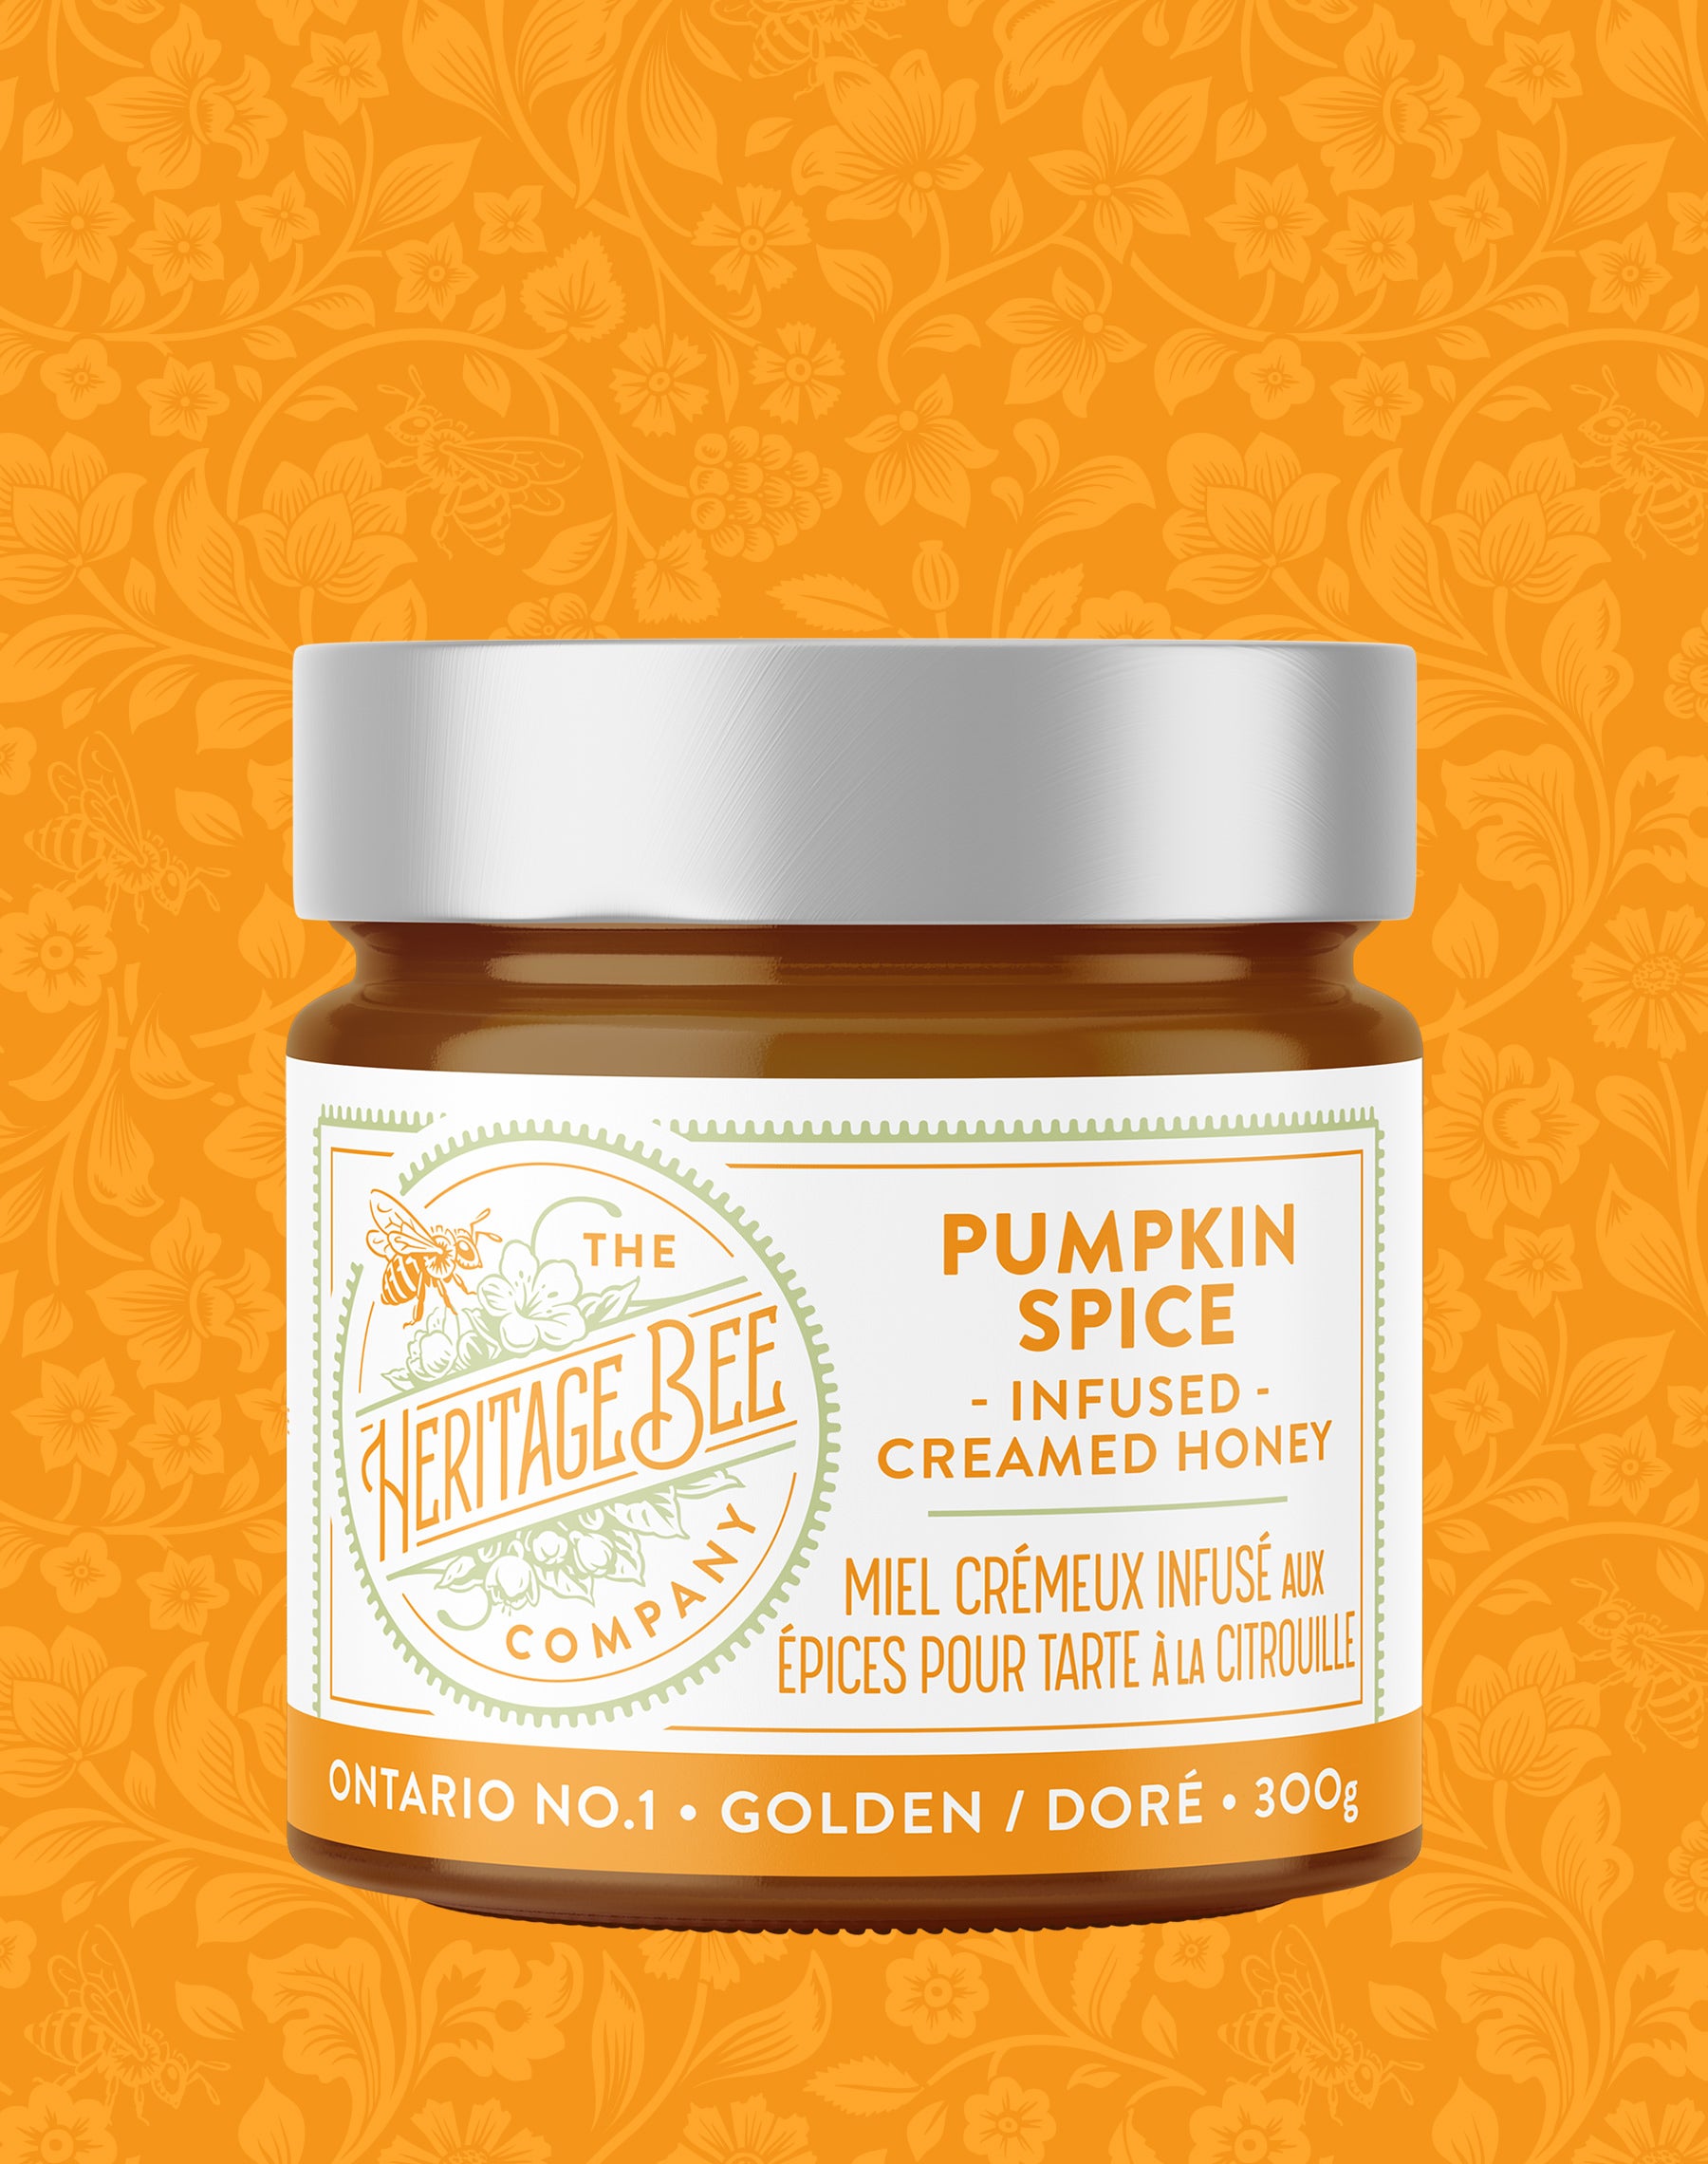 Pumpkin spice infused Ontario wildflower creamed honey handcrafted by the Heritage Bee Co. 